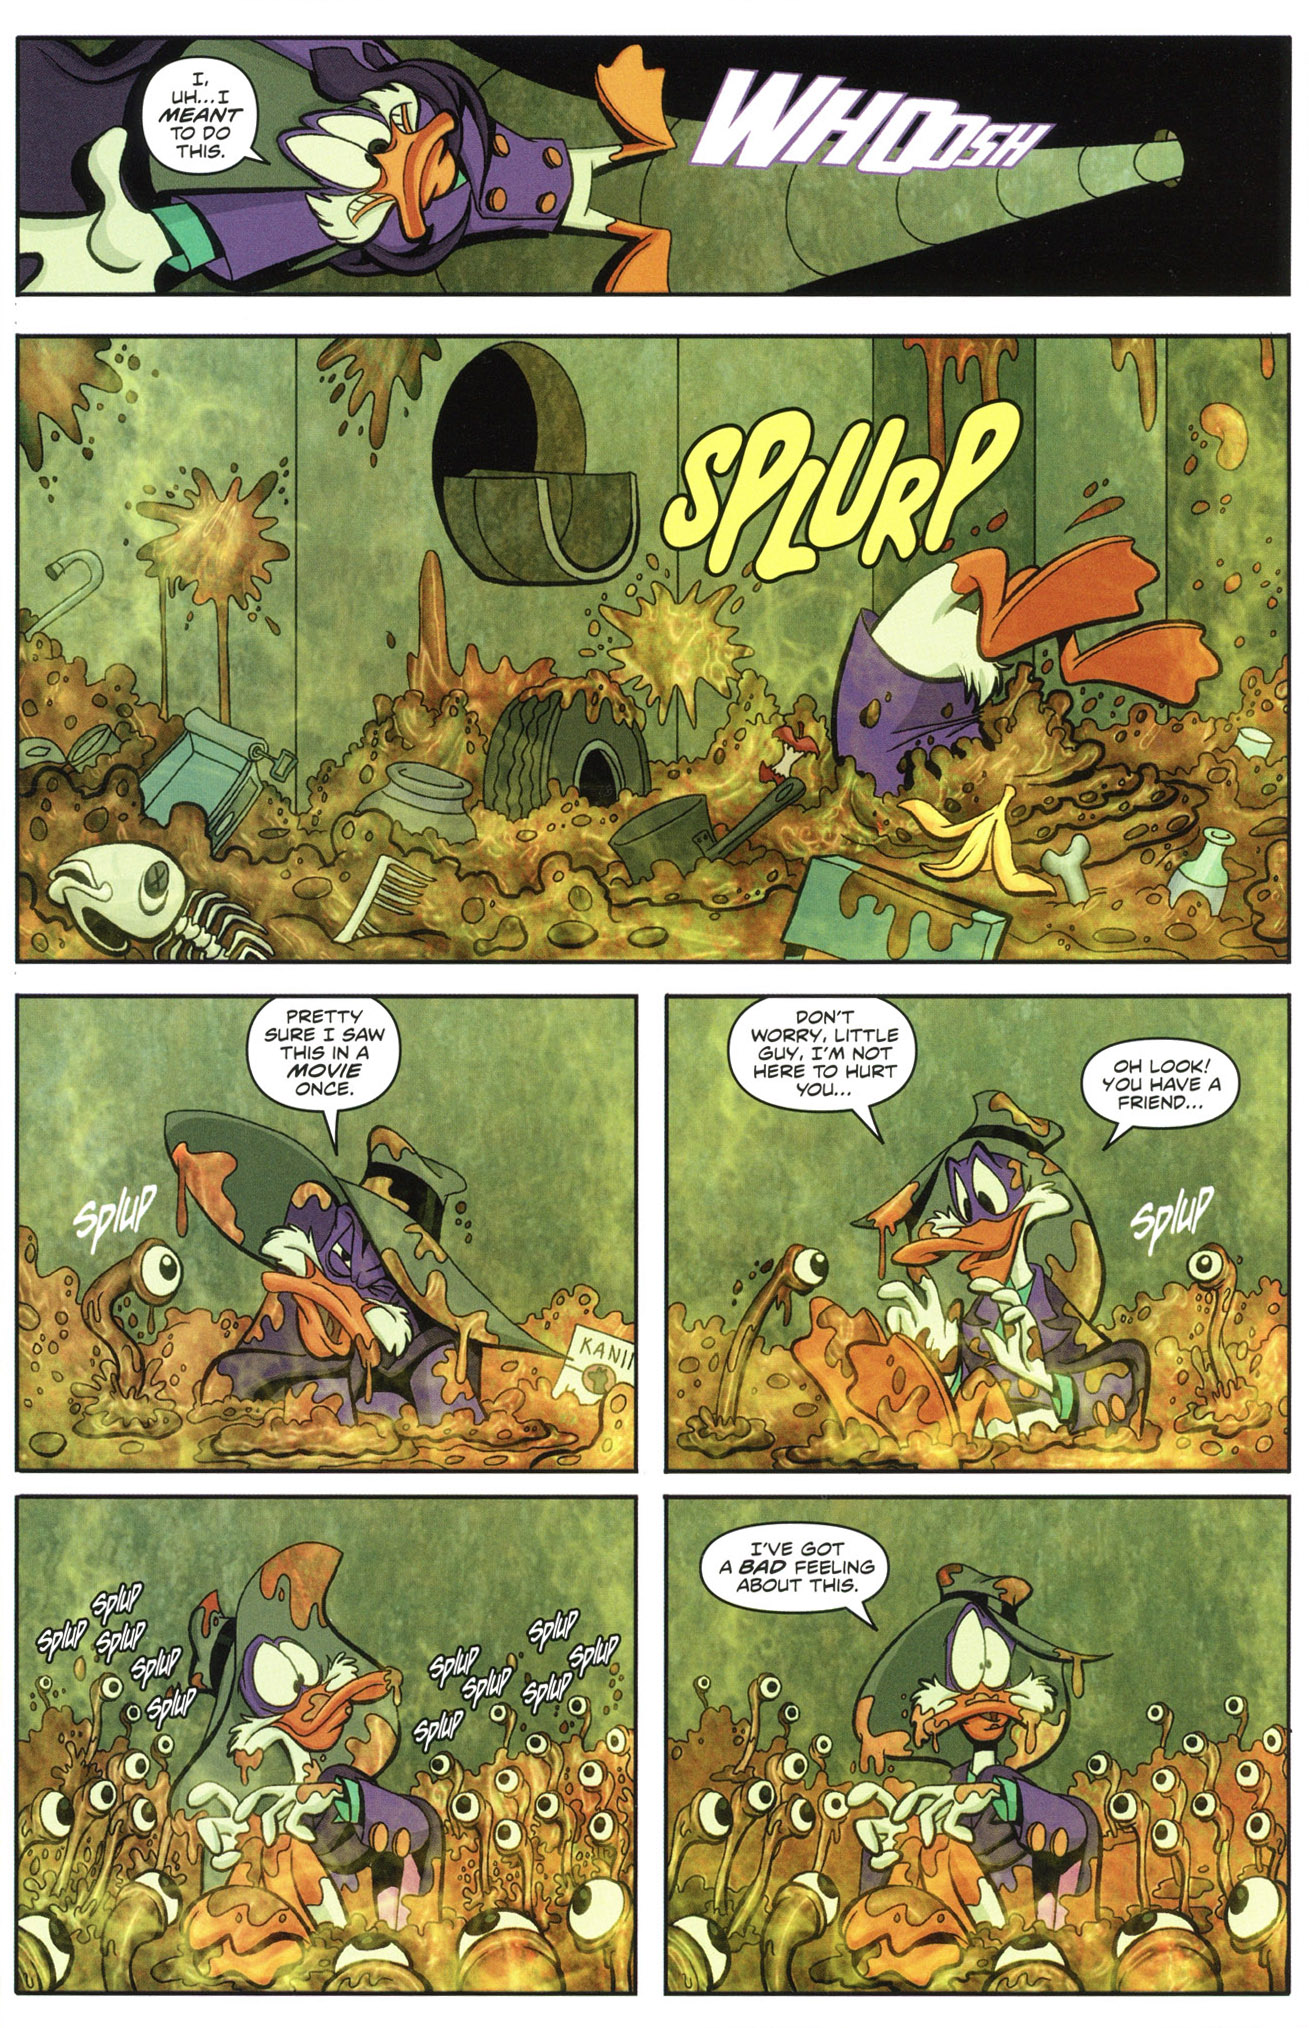 Disney Darkwing Duck 16 Chapter 2 Page 8